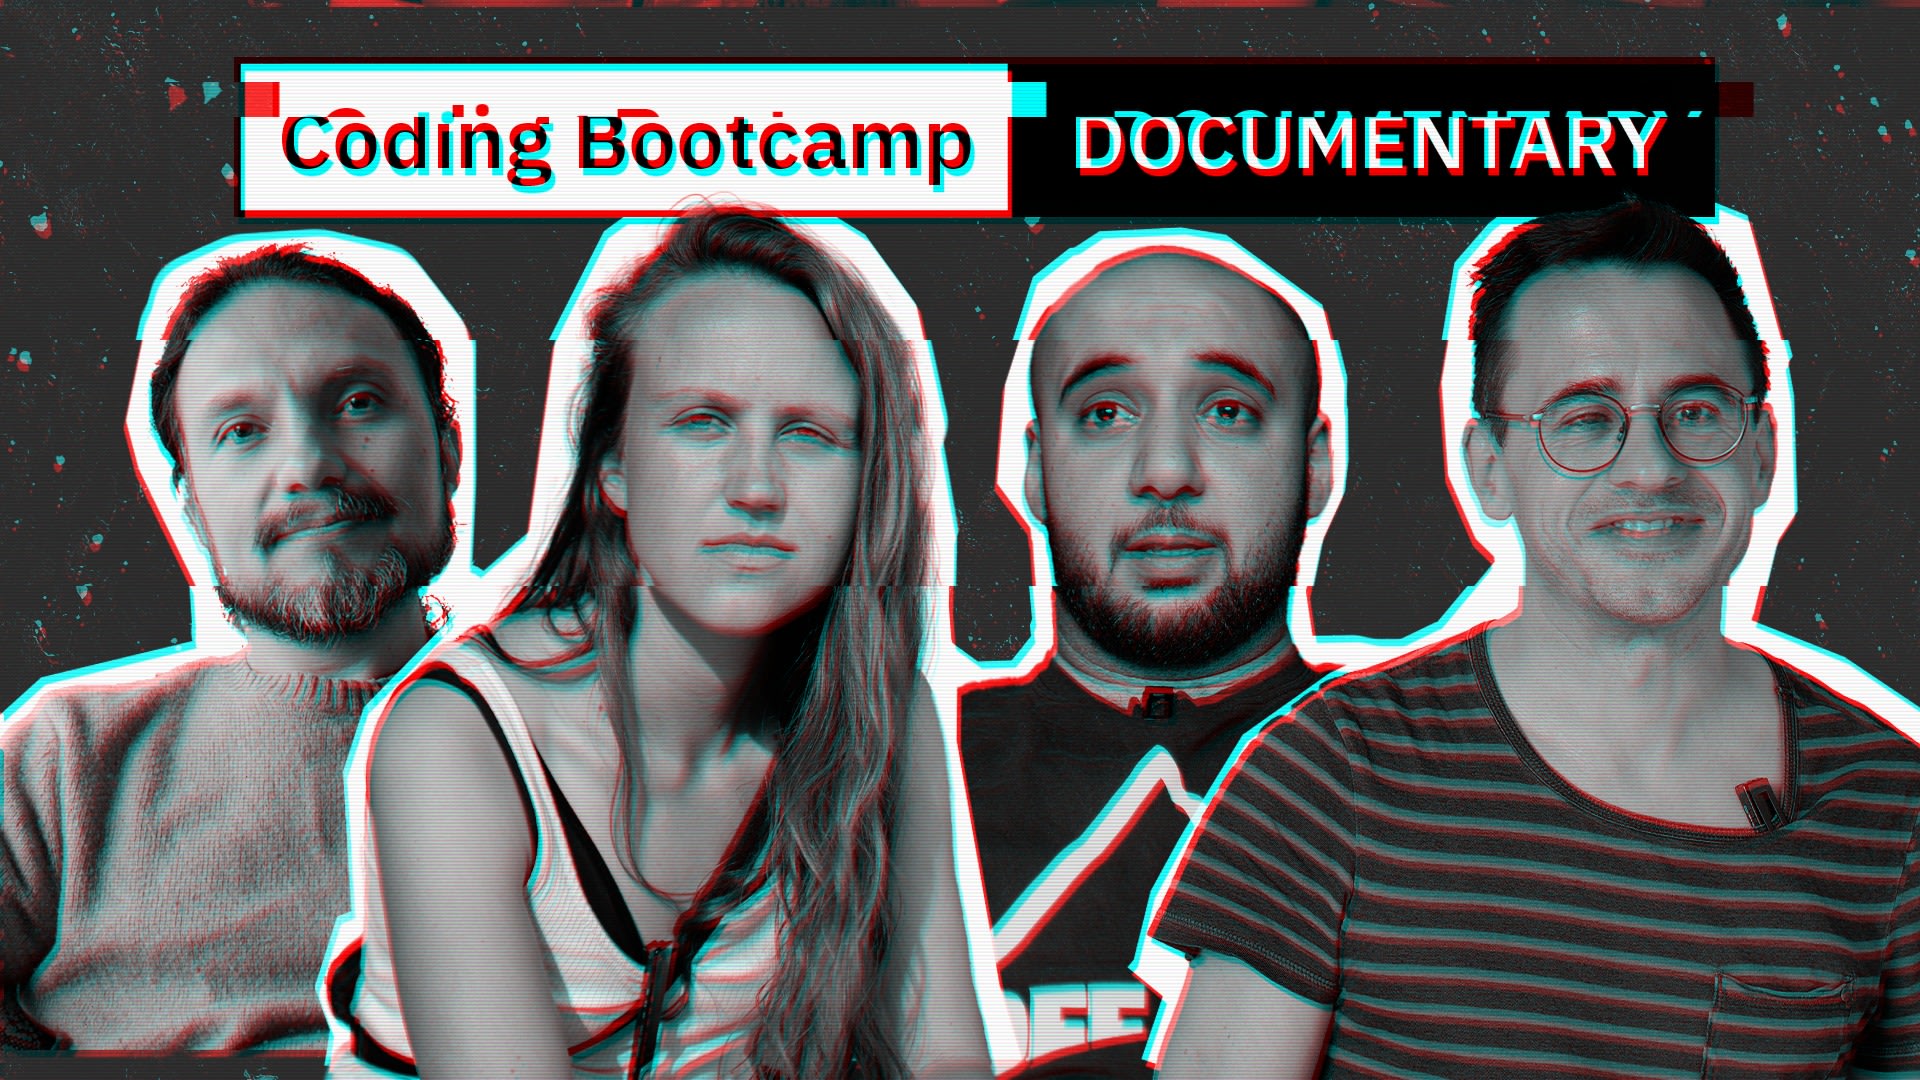 Coding Bootcamp Documentary (1/3): ‘You’re gonna have nightmares’